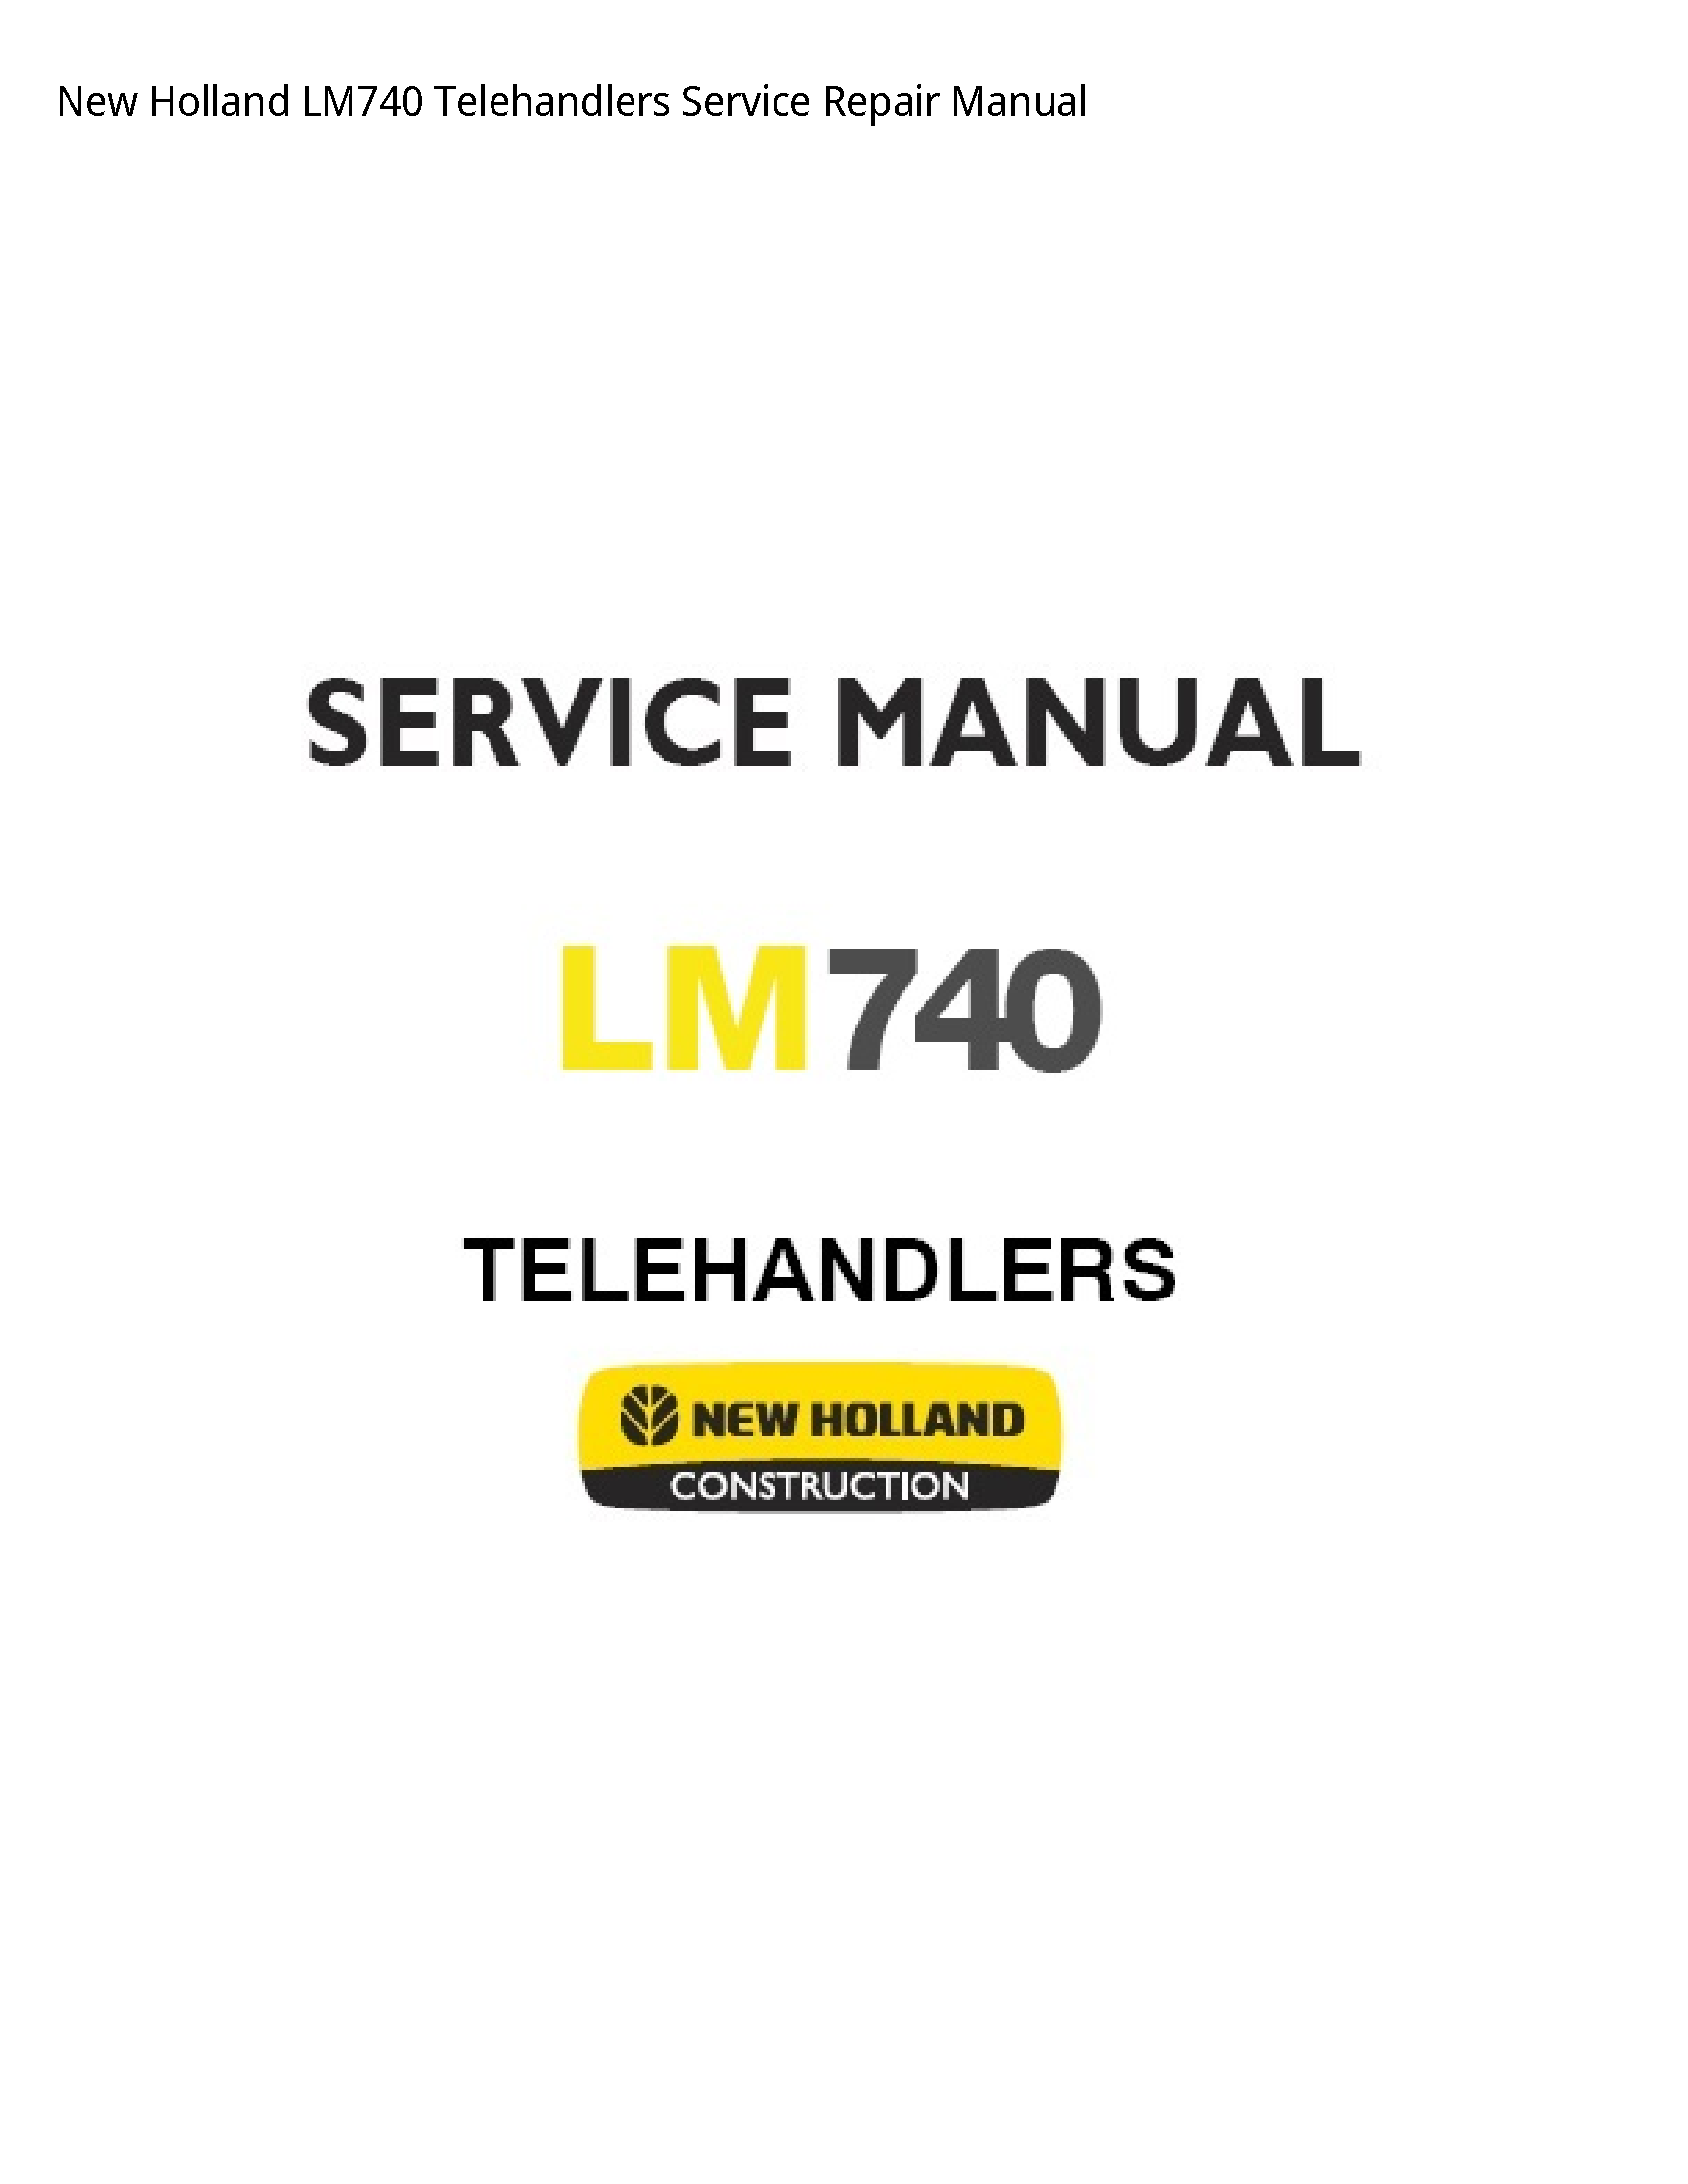 New Holland LM740 Telehandlers manual